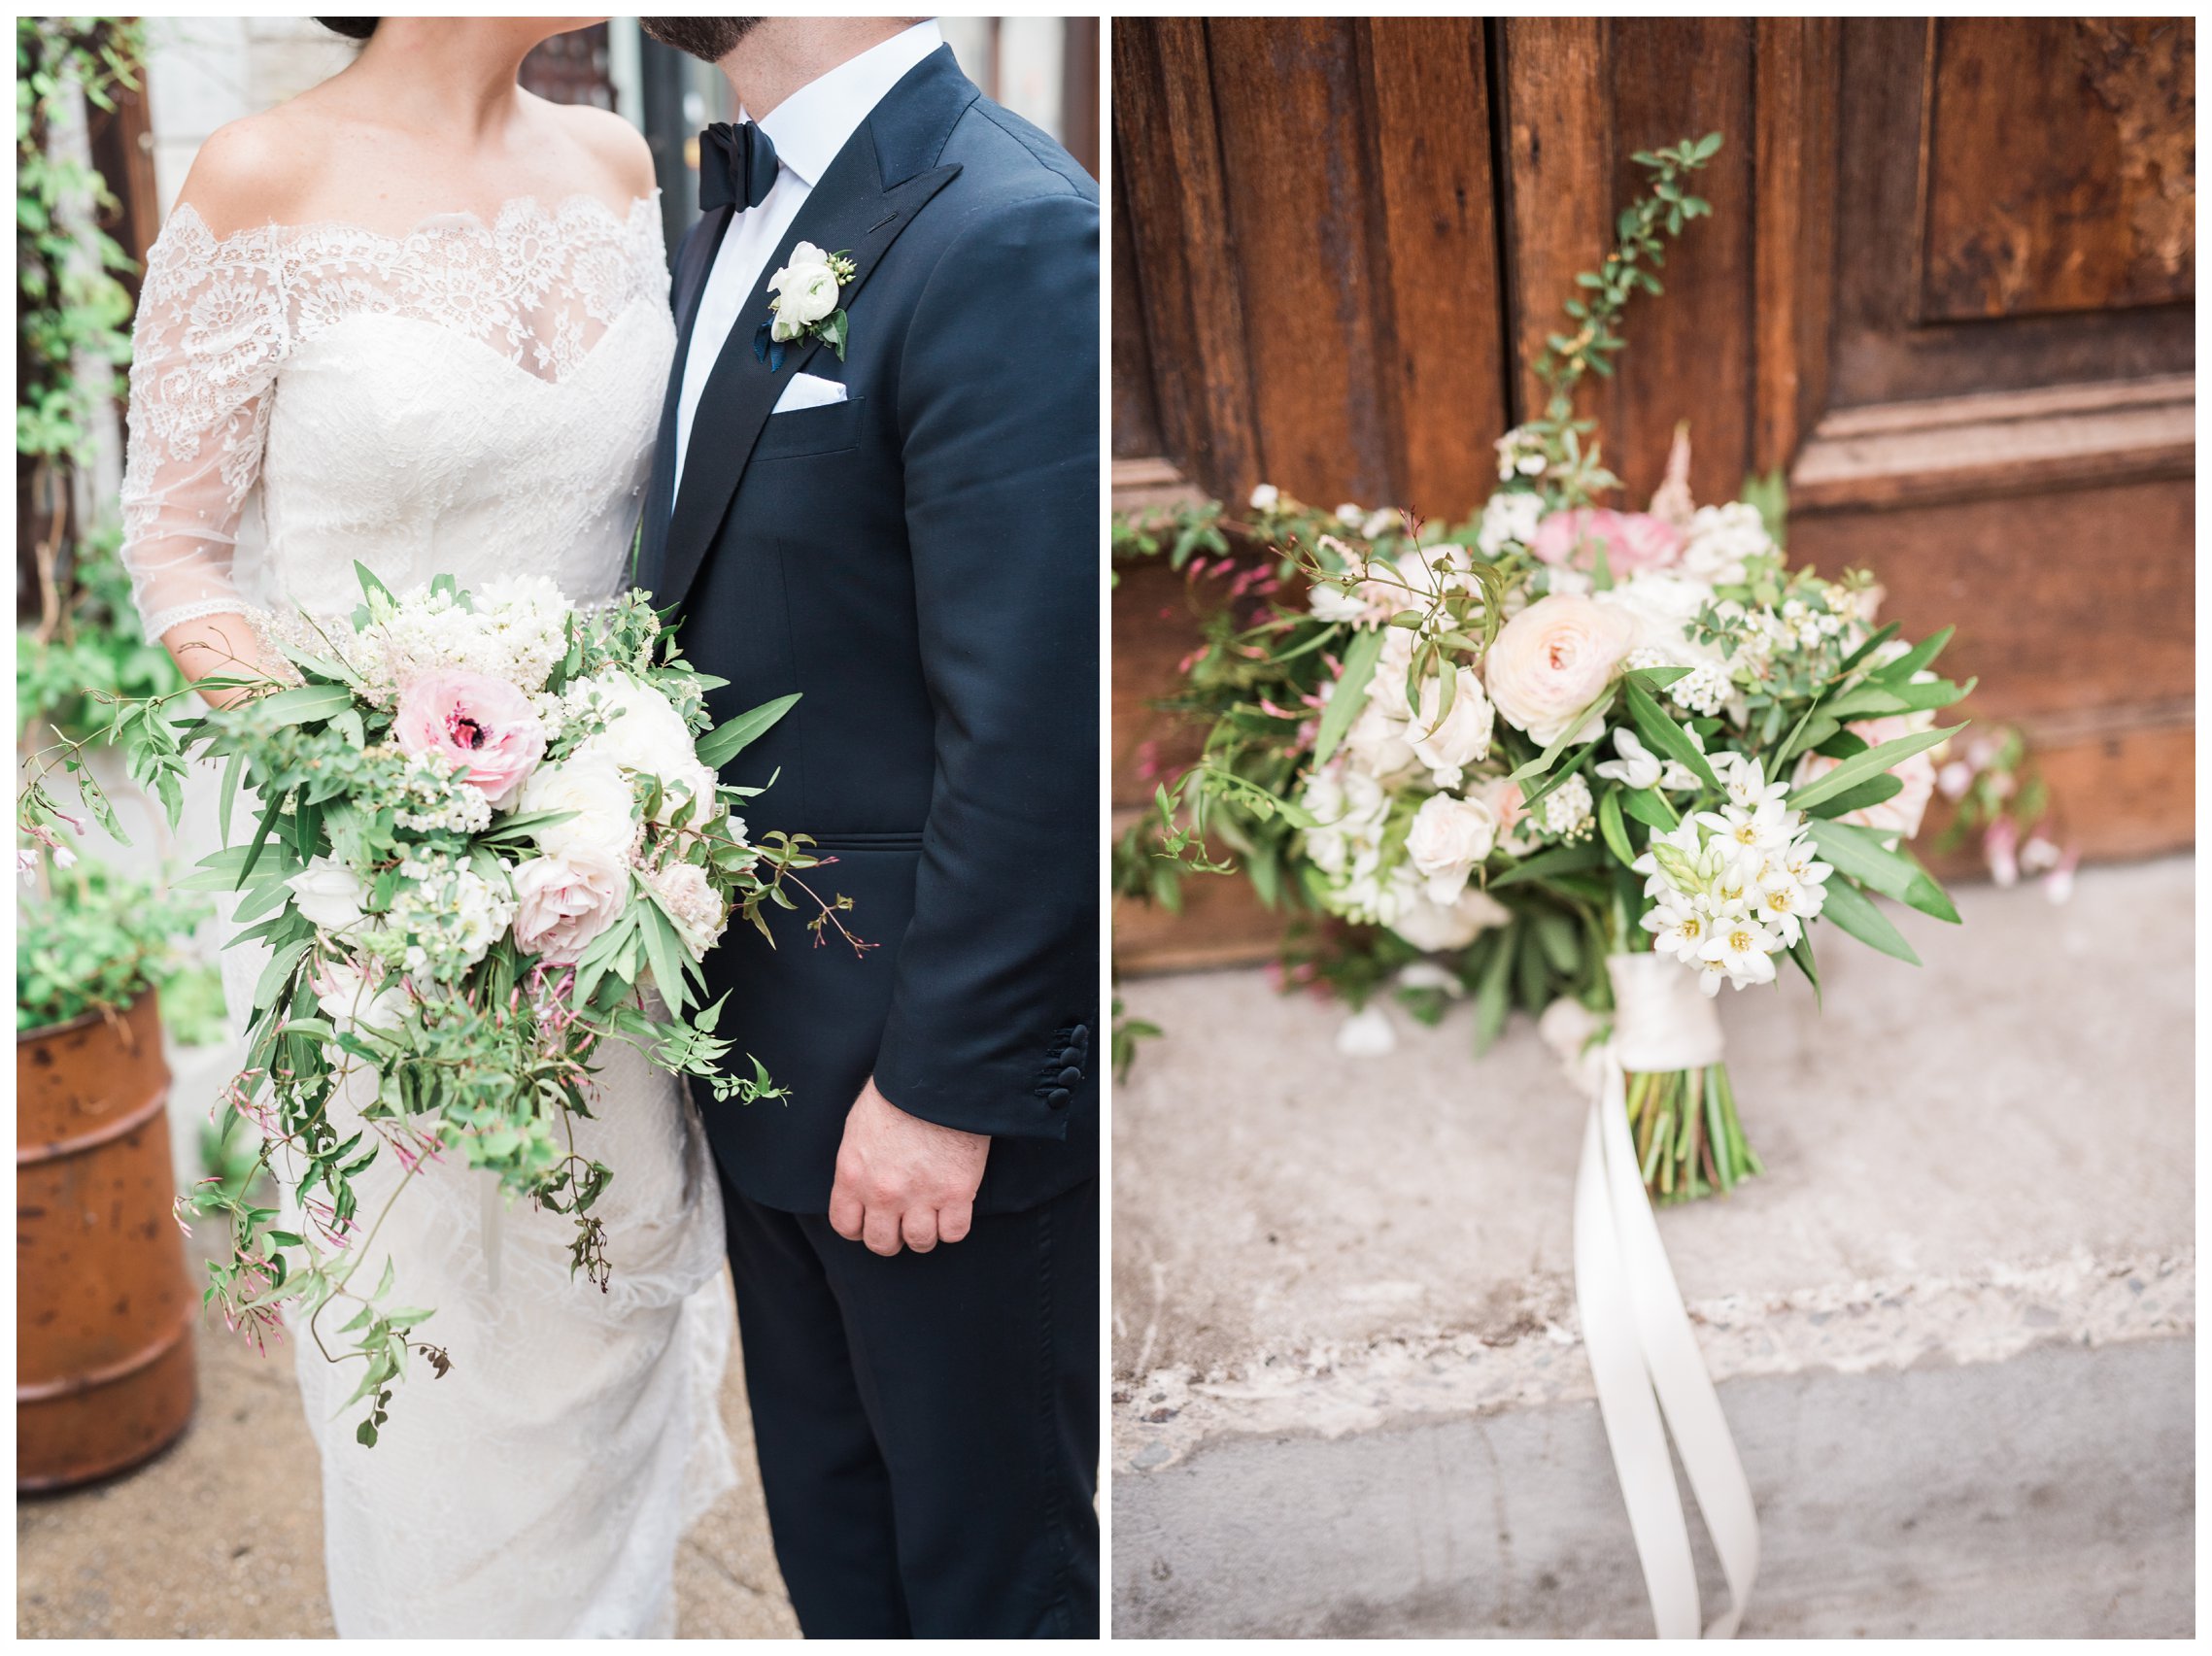 Brooklyn Winery Bride and Groom Portrait session with beautiful bouquet